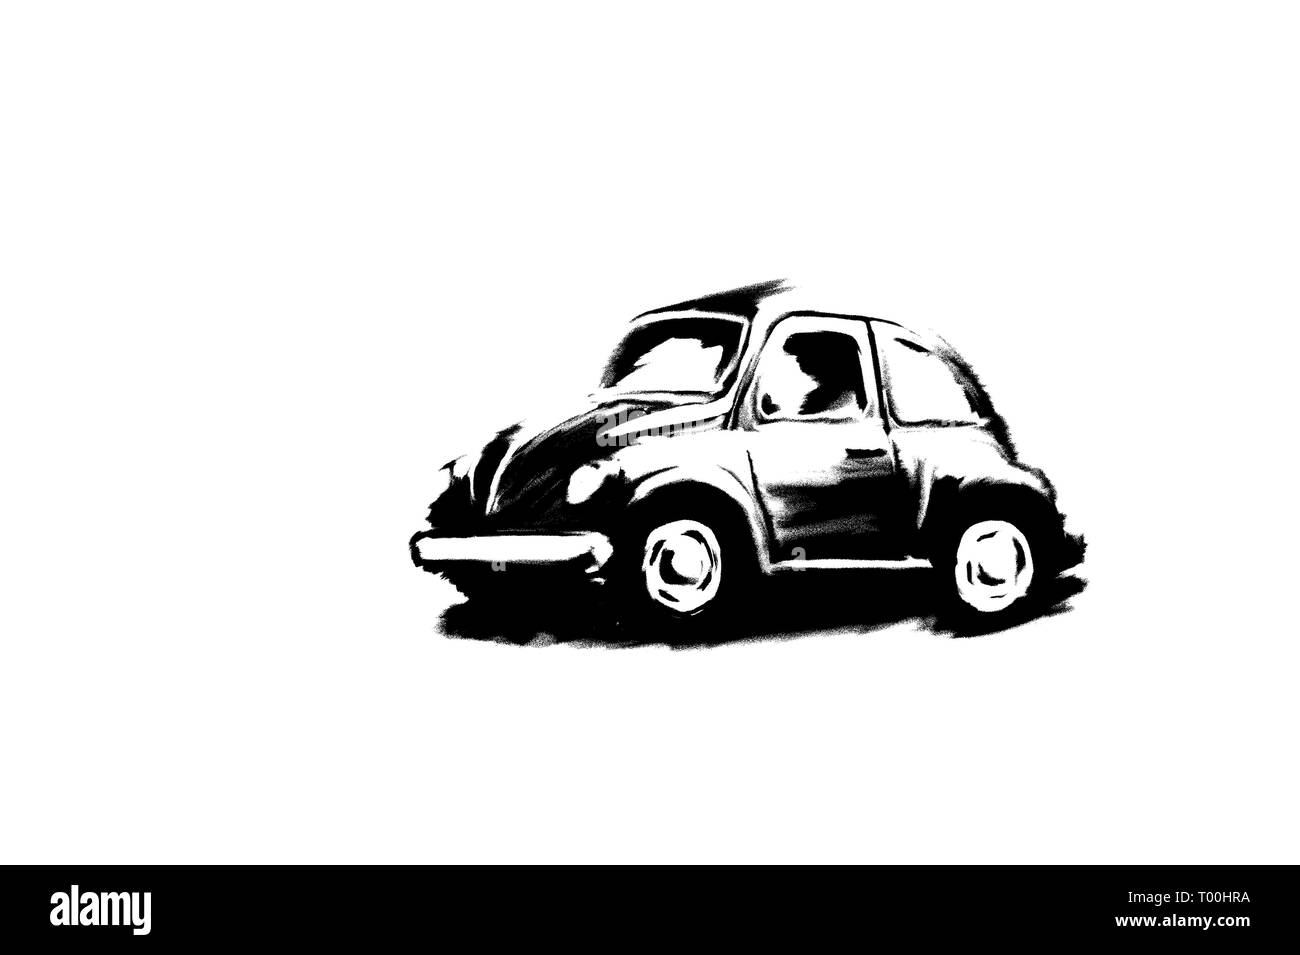 Toy car illustration with theresold effect on a white background Stock Photo